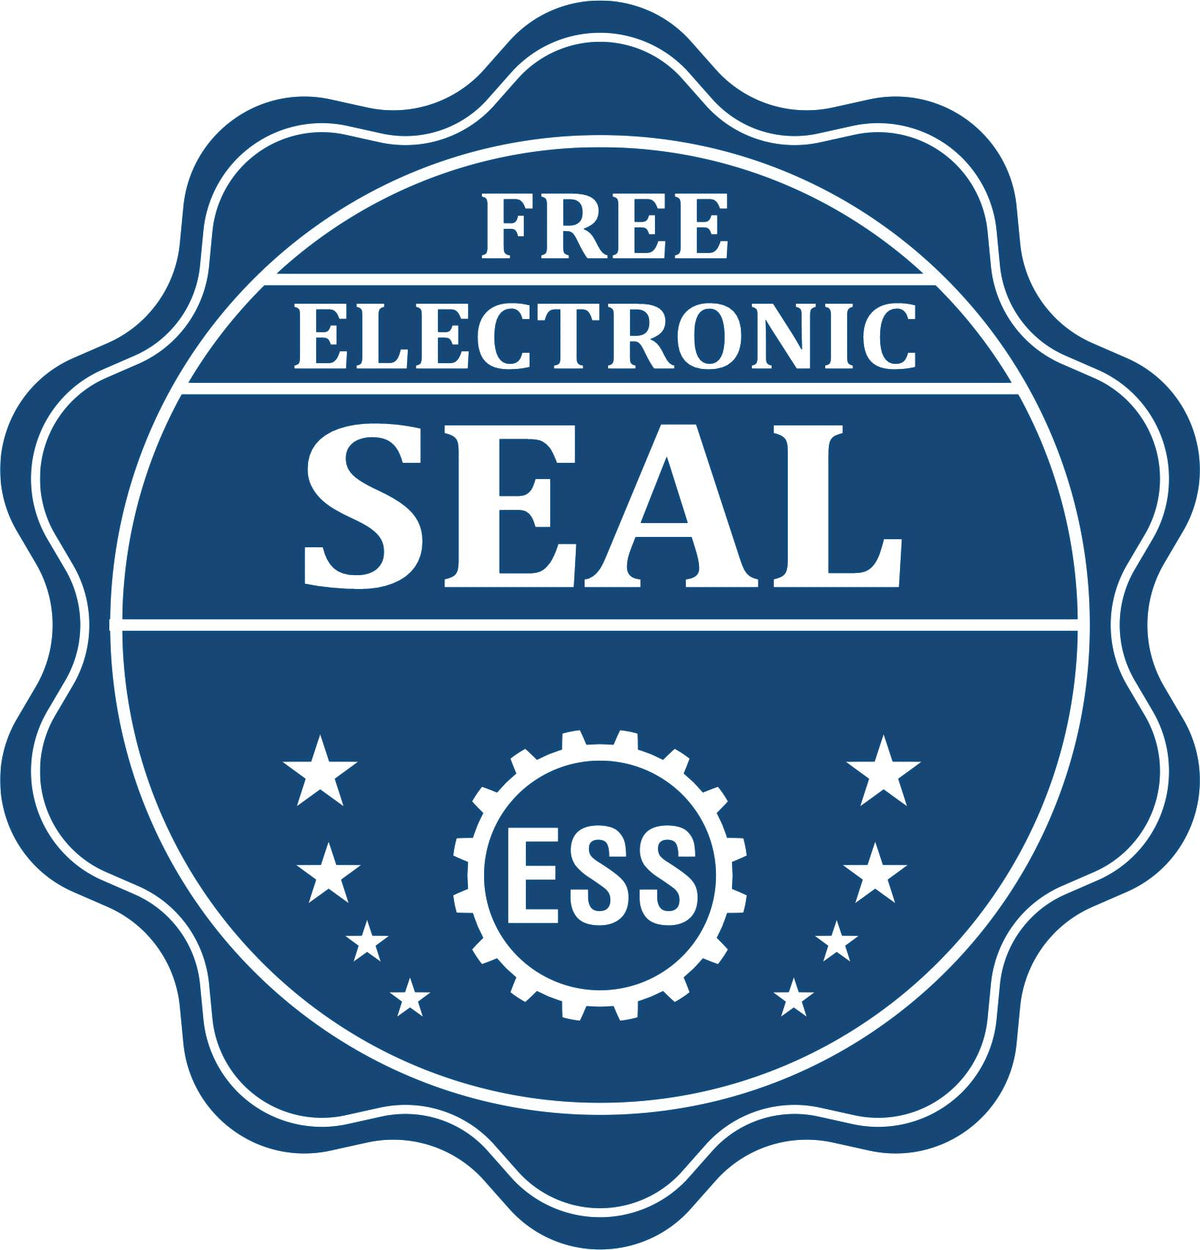 A badge showing a free electronic seal for the Handheld Arizona Professional Geologist Embosser with stars and the ESS gear on the emblem.